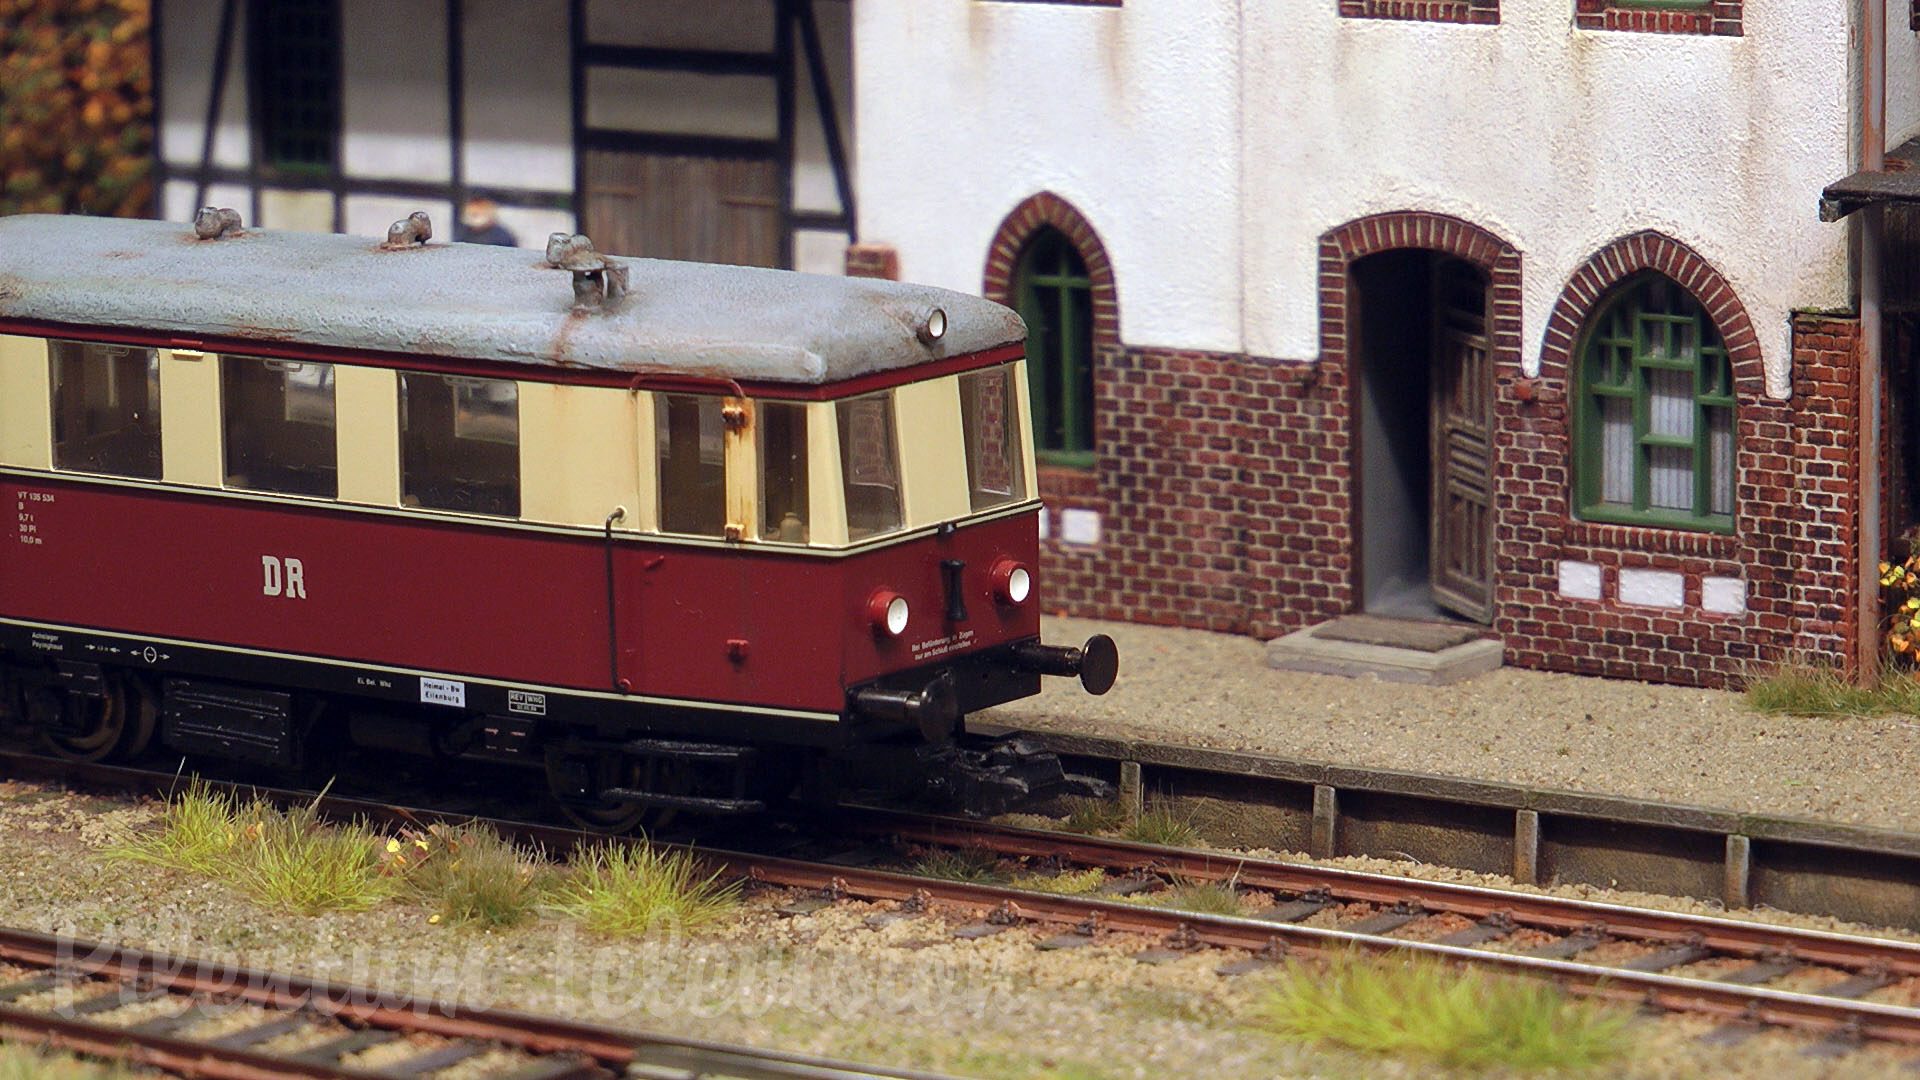 Beautiful model railway of steam trains and steam locomotives used in East Germany